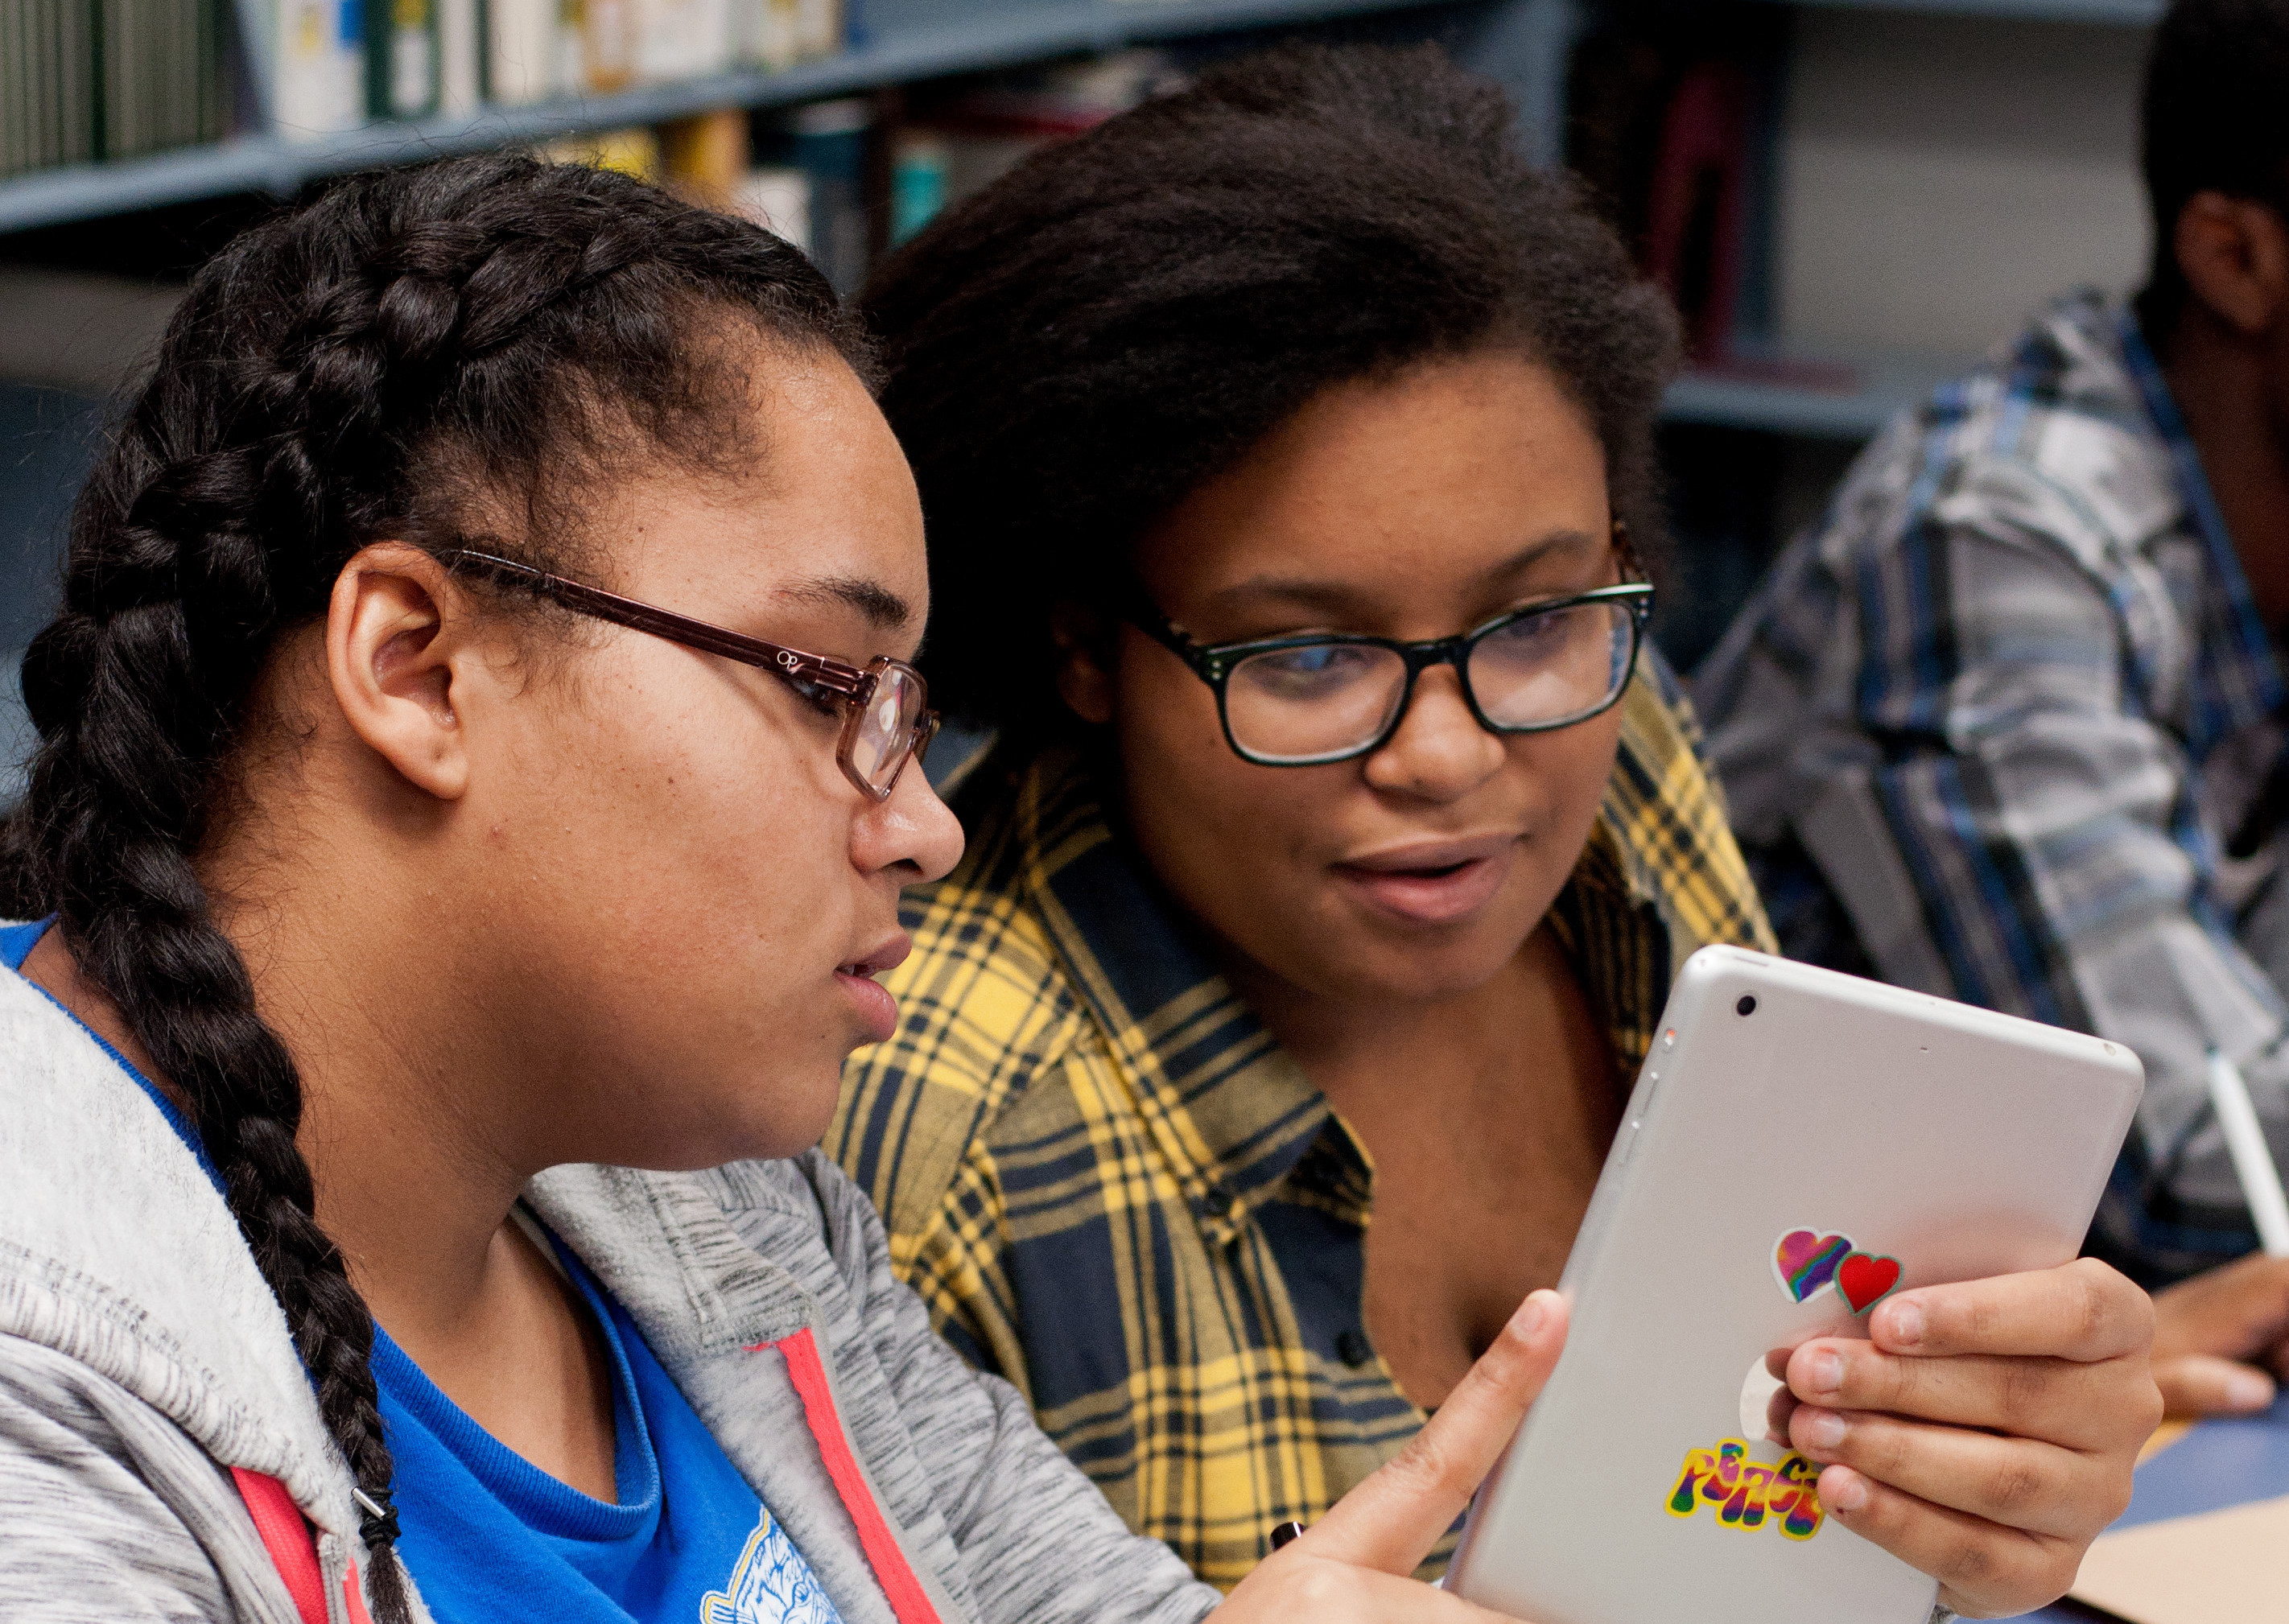 Image of two students looking at a tablet